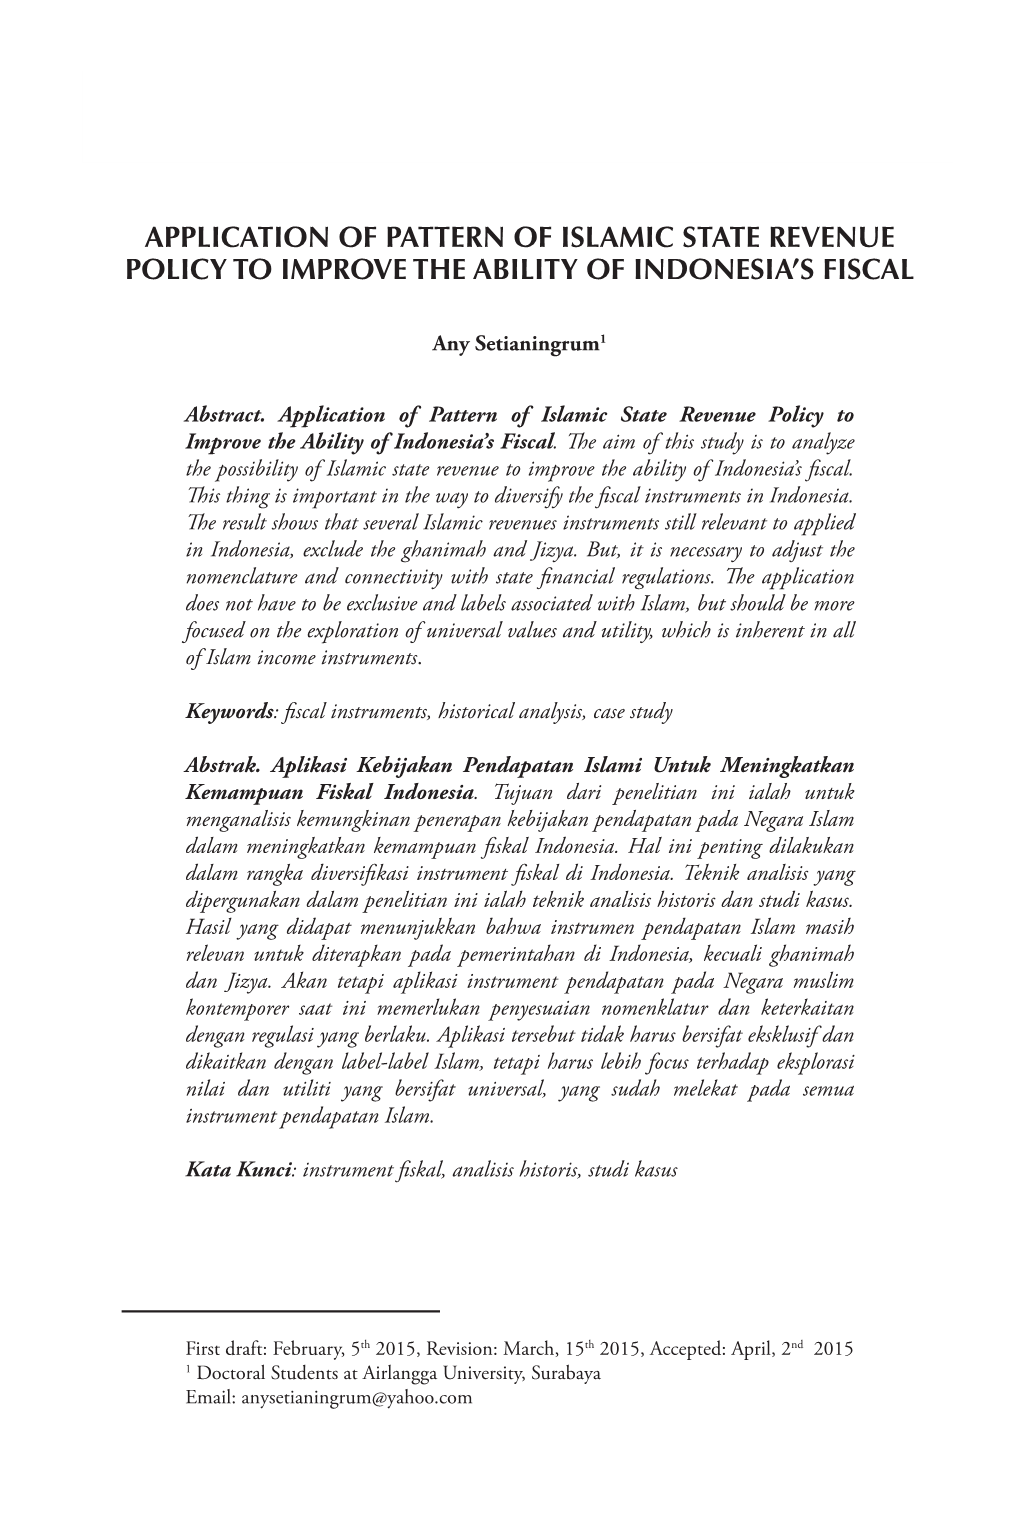 Application of Pattern of Islamic State Revenue Policy to Improve the Ability of Indonesia's Fiscal